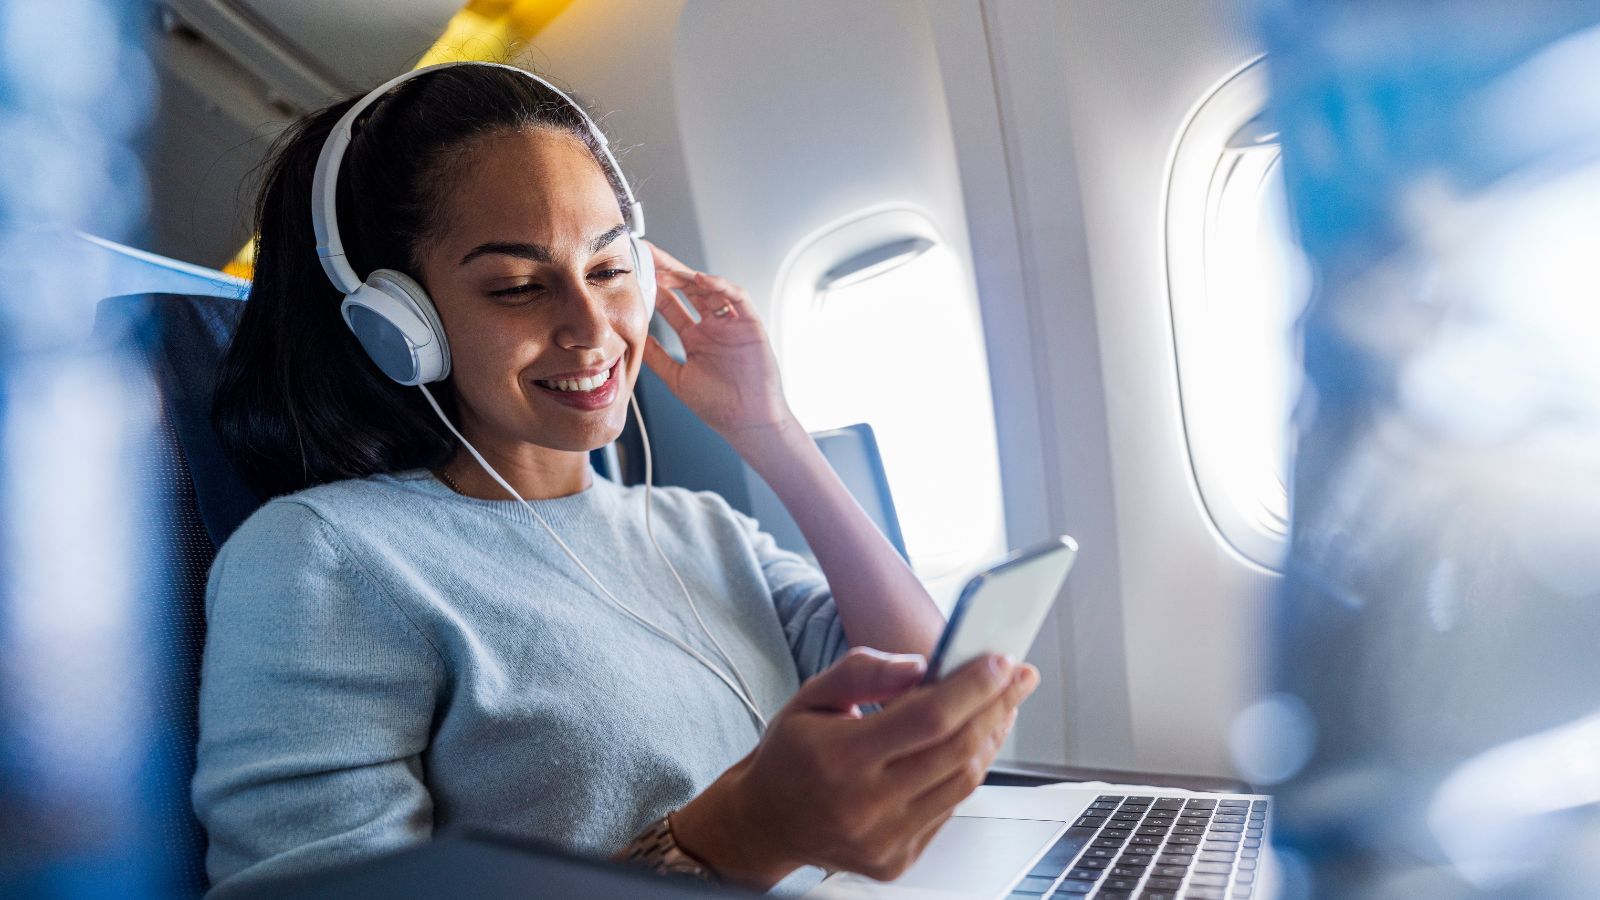 How to Listen to Music on a Plane?